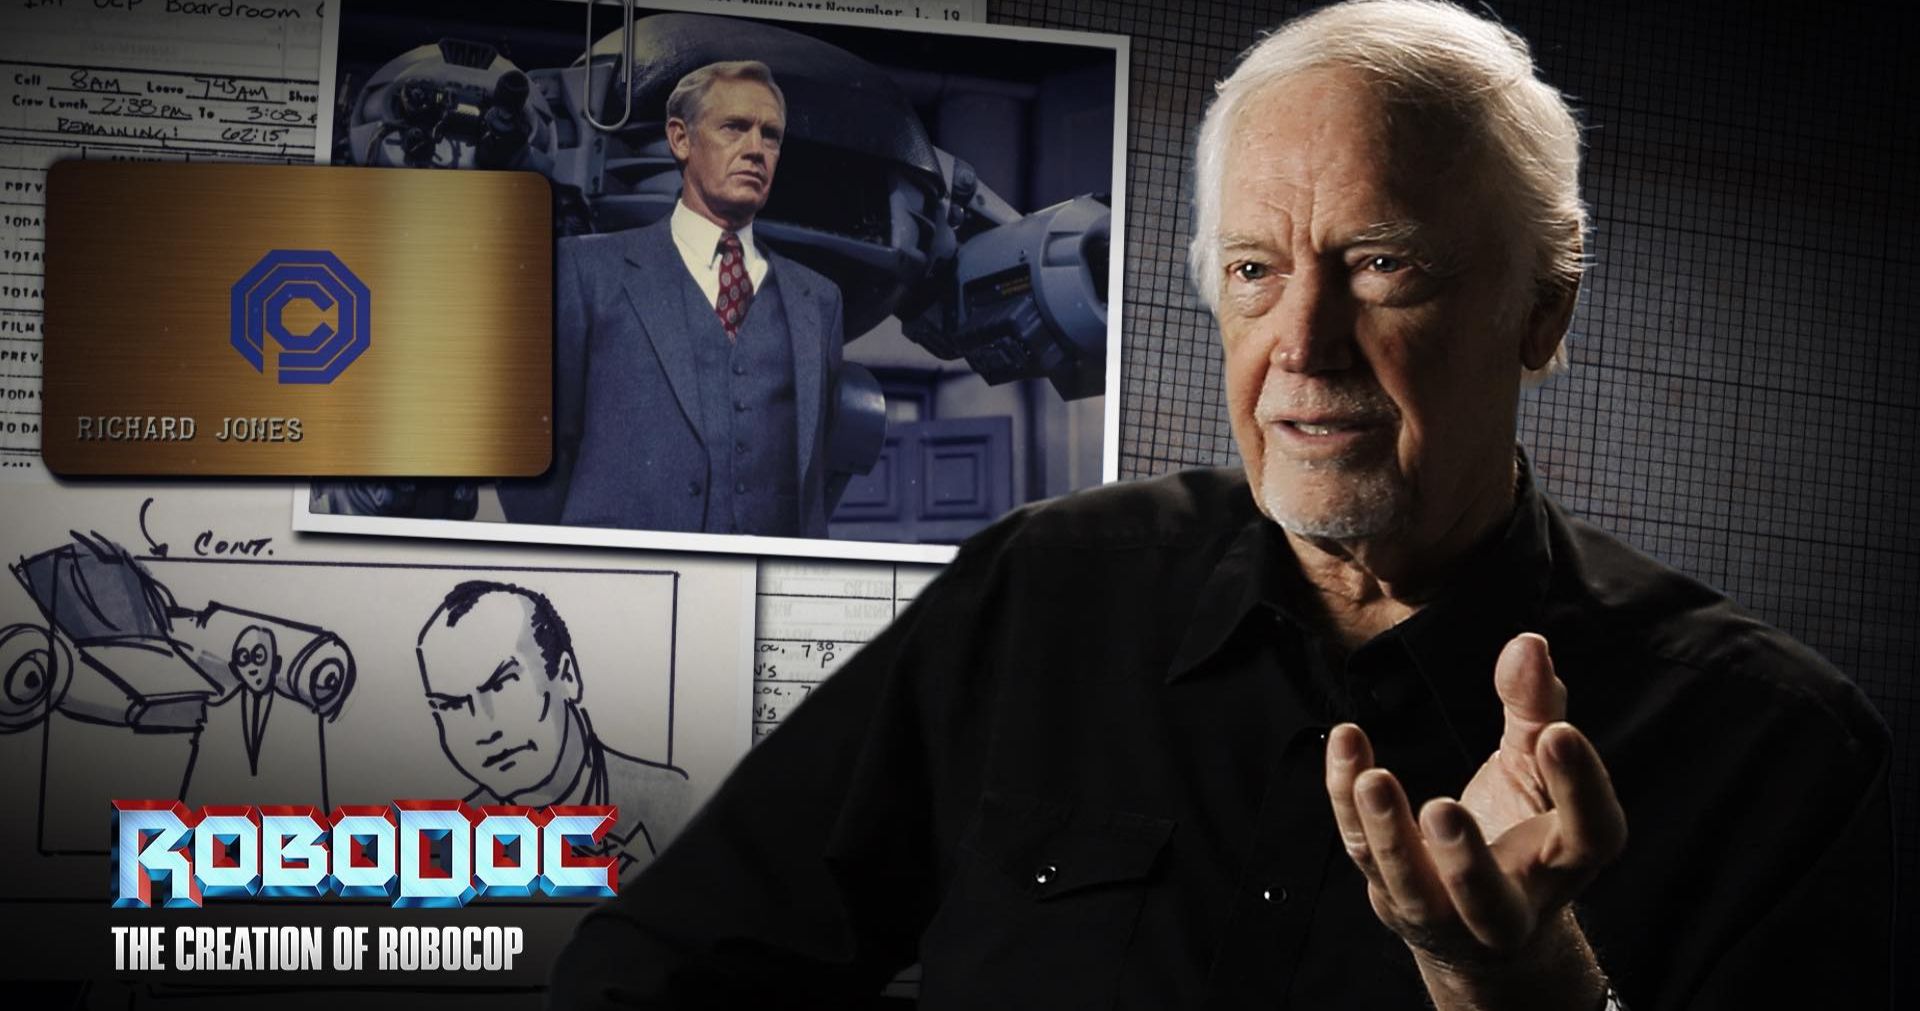 RoboDoc Filmmakers Reveal What They Found Creating the Definitive RoboCop Documentary [Exclusive]